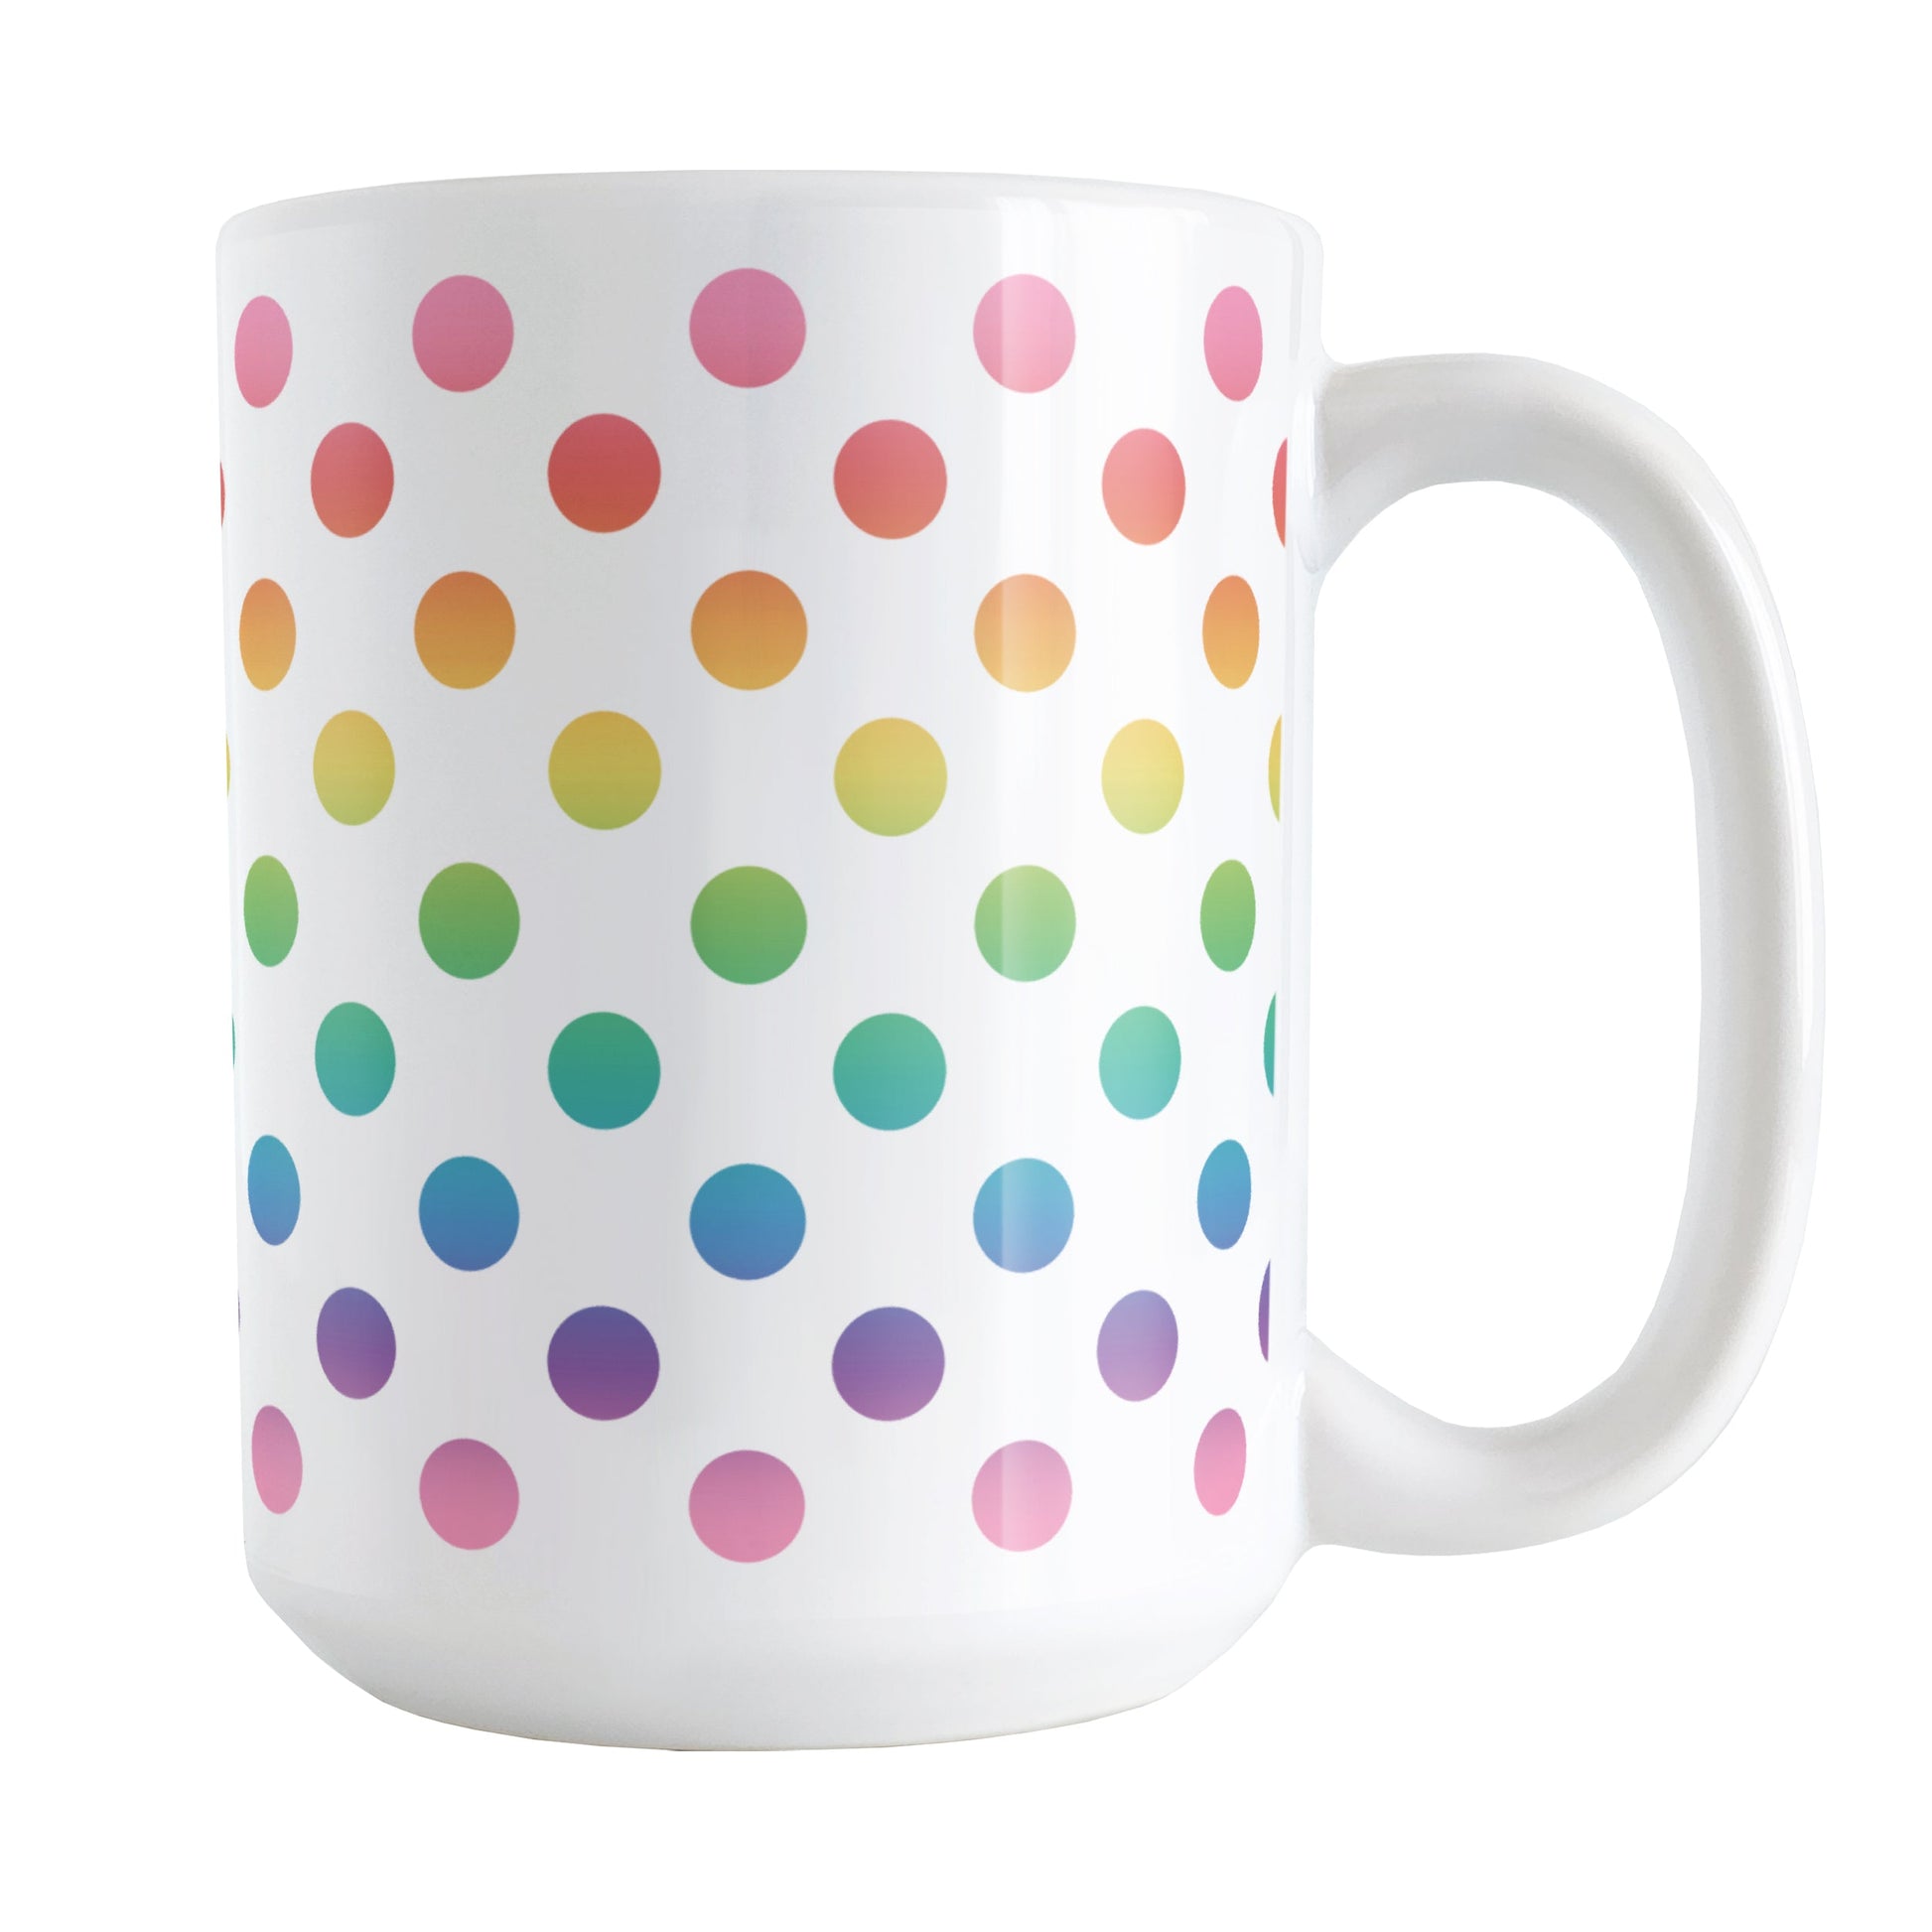 Rainbow Polka Dots Mug (15oz) at Amy's Coffee Mugs. A ceramic coffee mug designed with a pattern of polka dots in a vertical rainbow gradient progression over white that wraps around the mug.